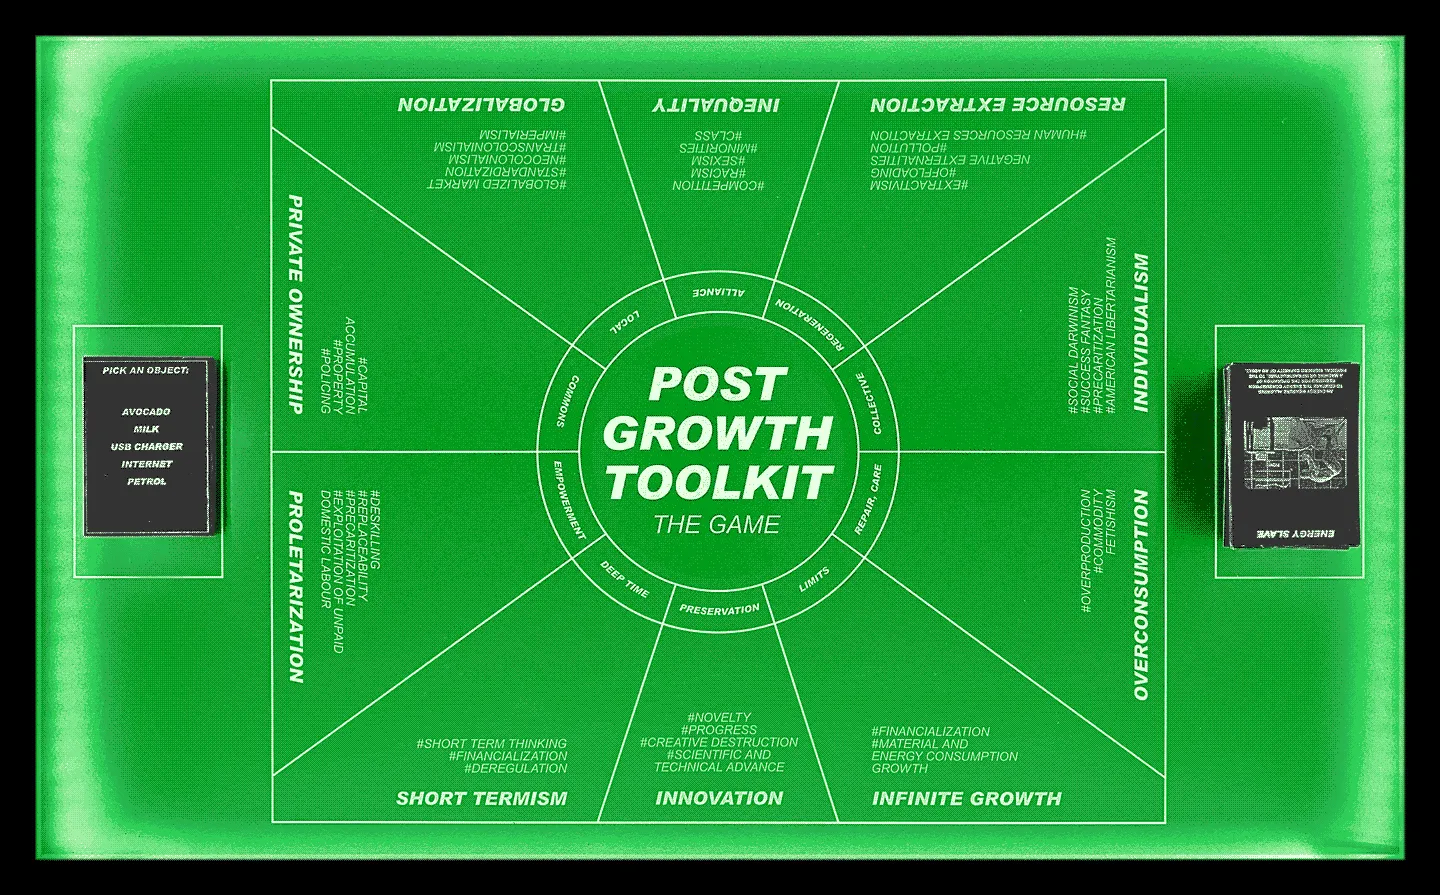 Worshop Post Growth Toolkit [The Game]